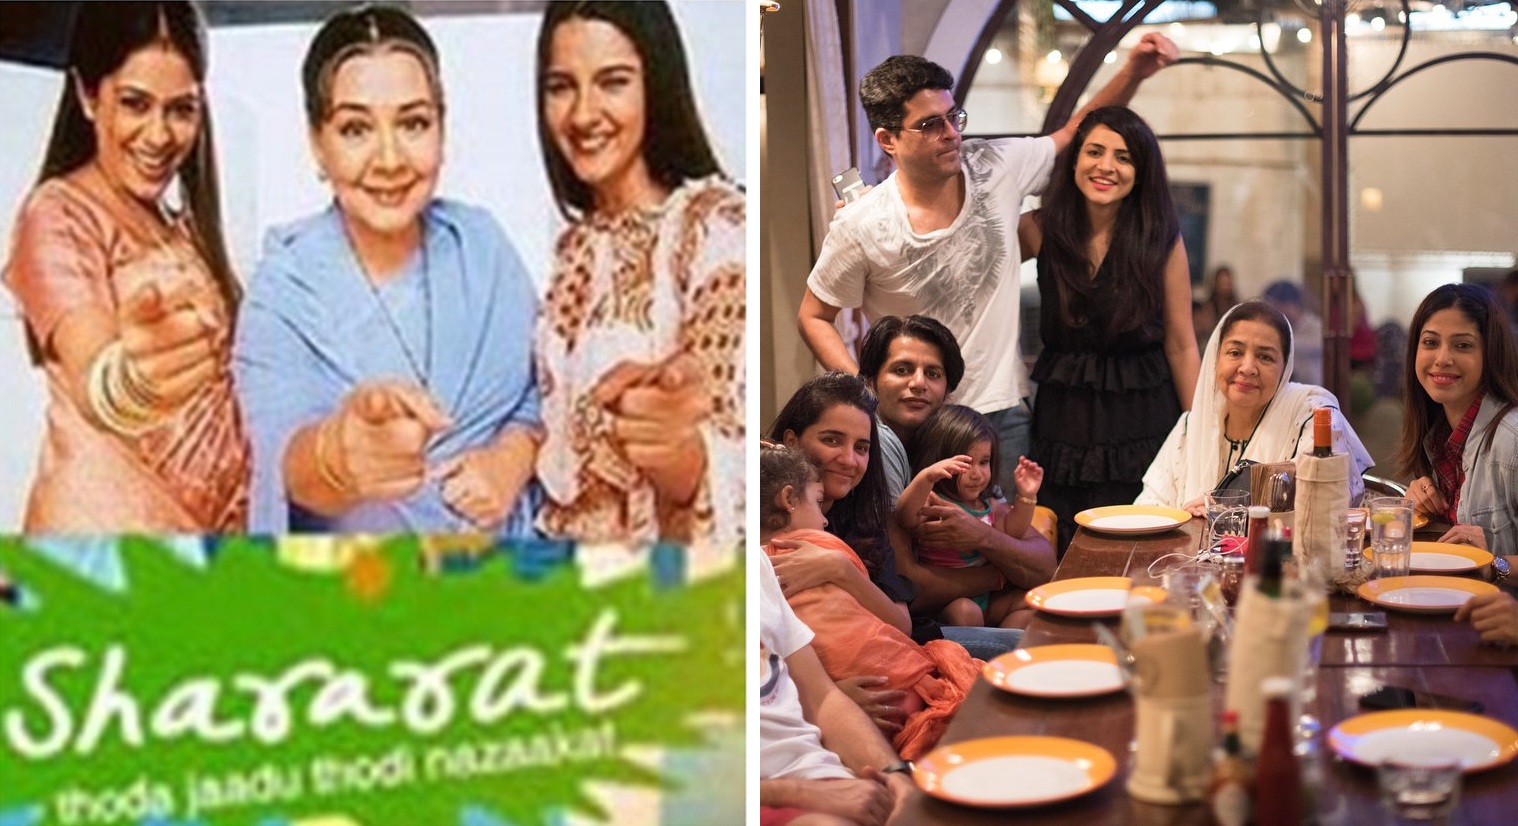 Remember Shararat? The Show’s Latest Reunion-Pics will hit you with Nostalgia!